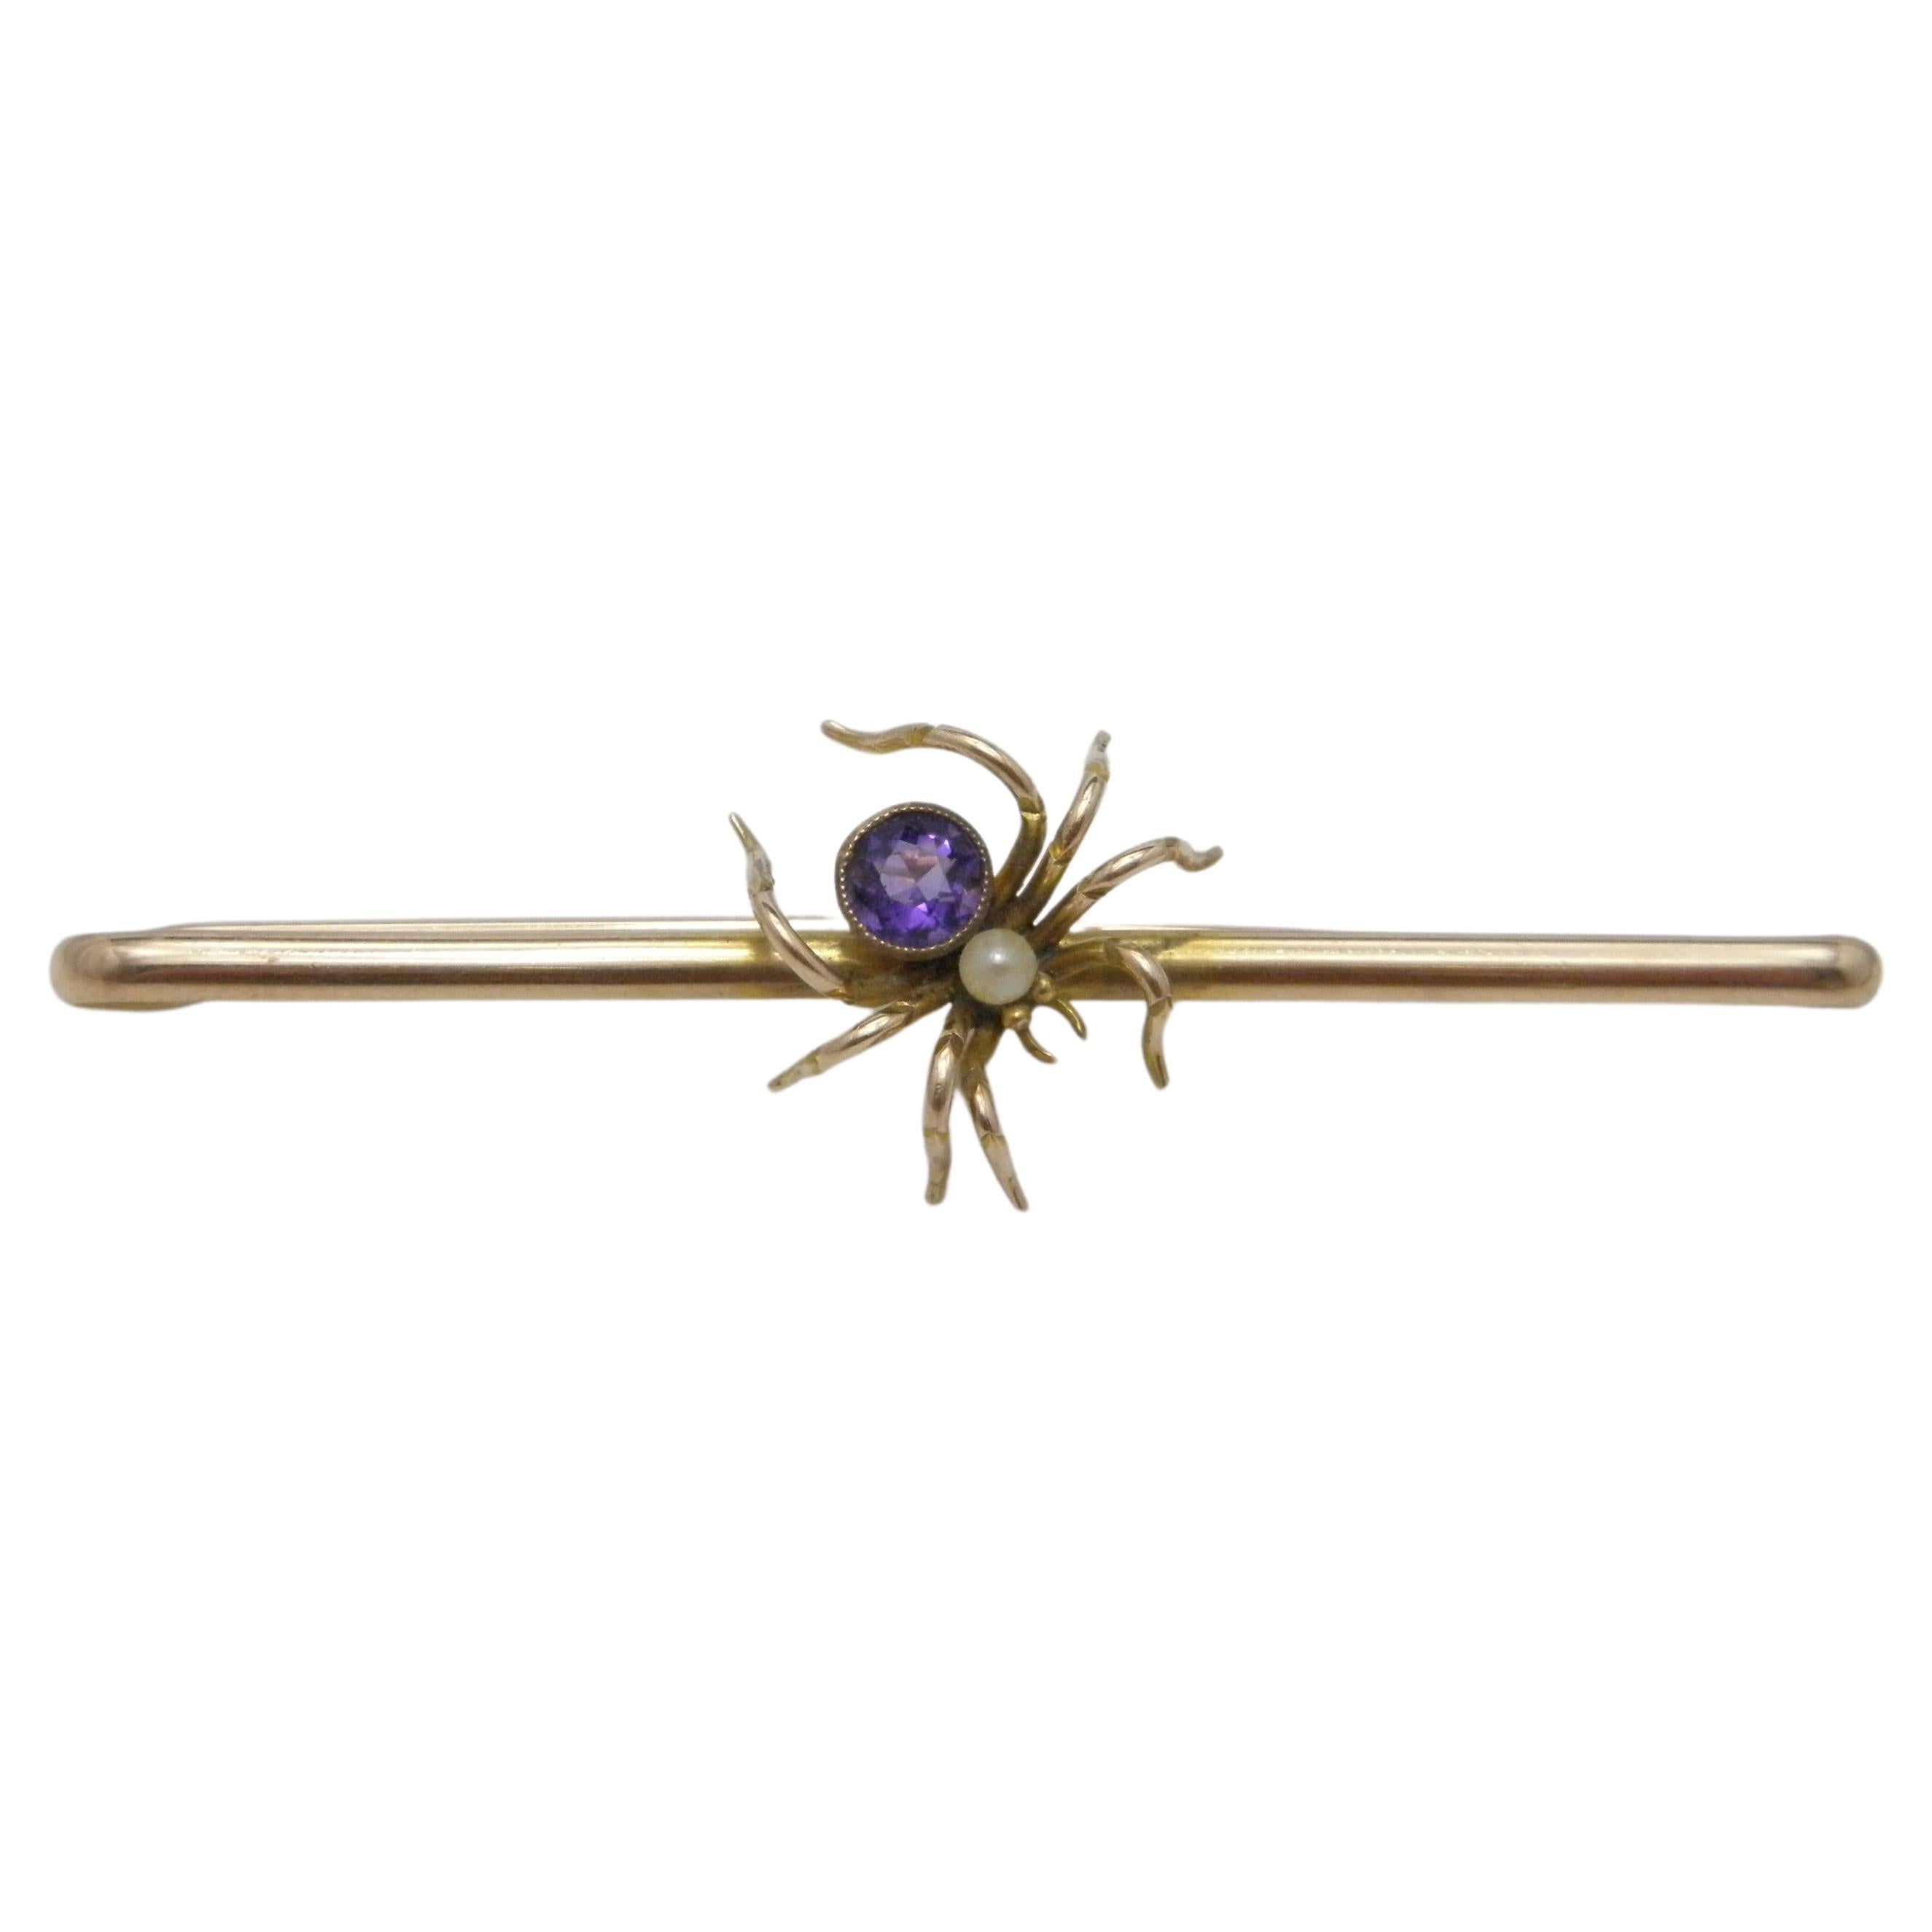 Antique 9ct Gold Large Amethyst Pearl Spider Bug Brooch Pin c1860 Heavy 6.4g 375 For Sale